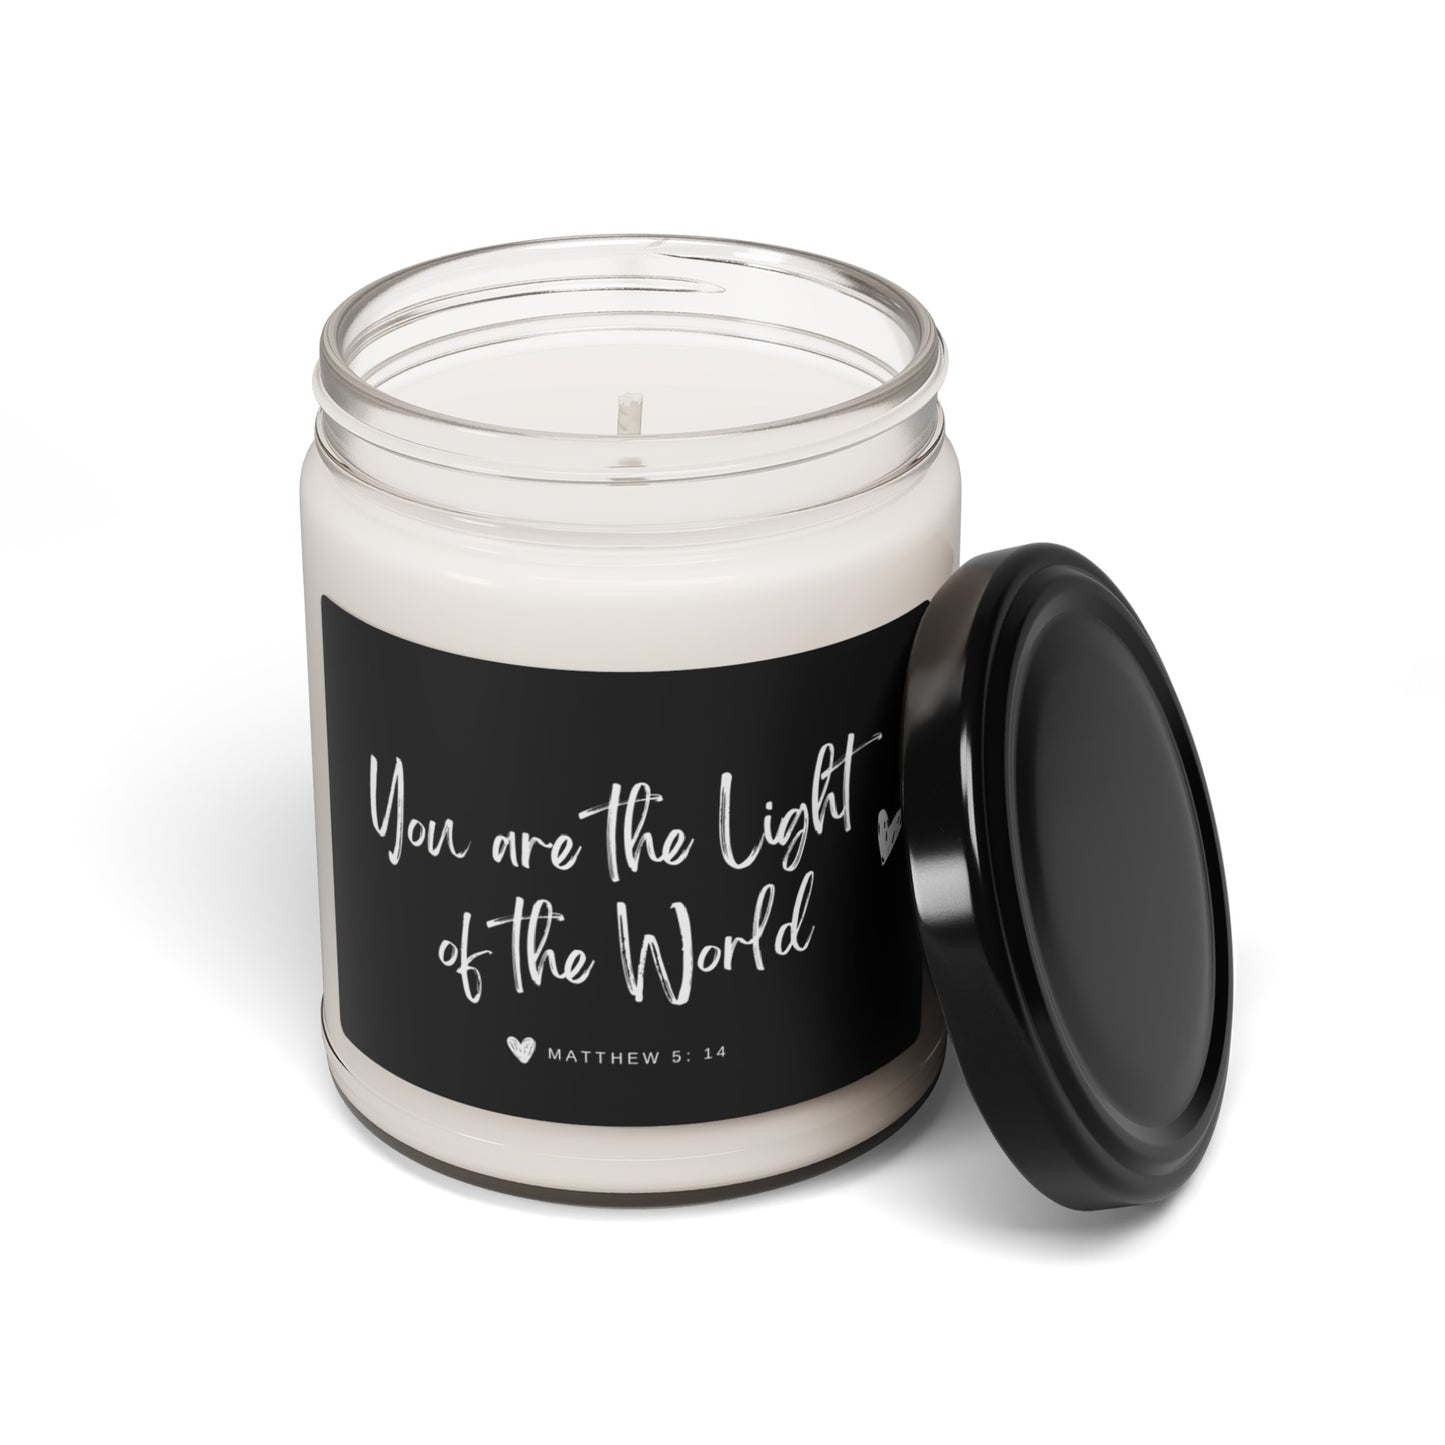 You are the Light. Scented Soy Candle, 9oz